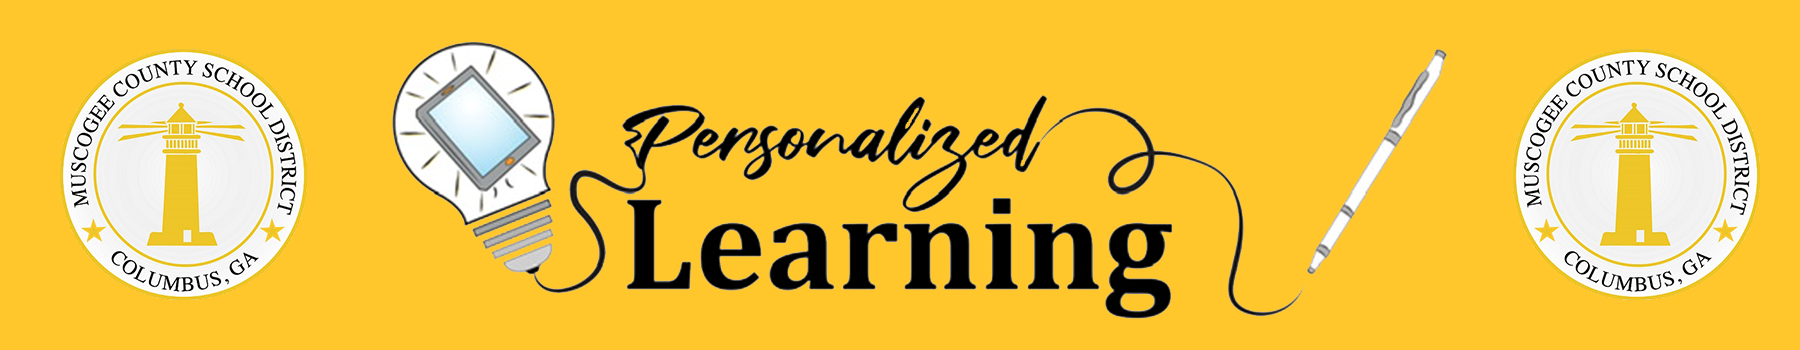 Banner for Personalized Learning